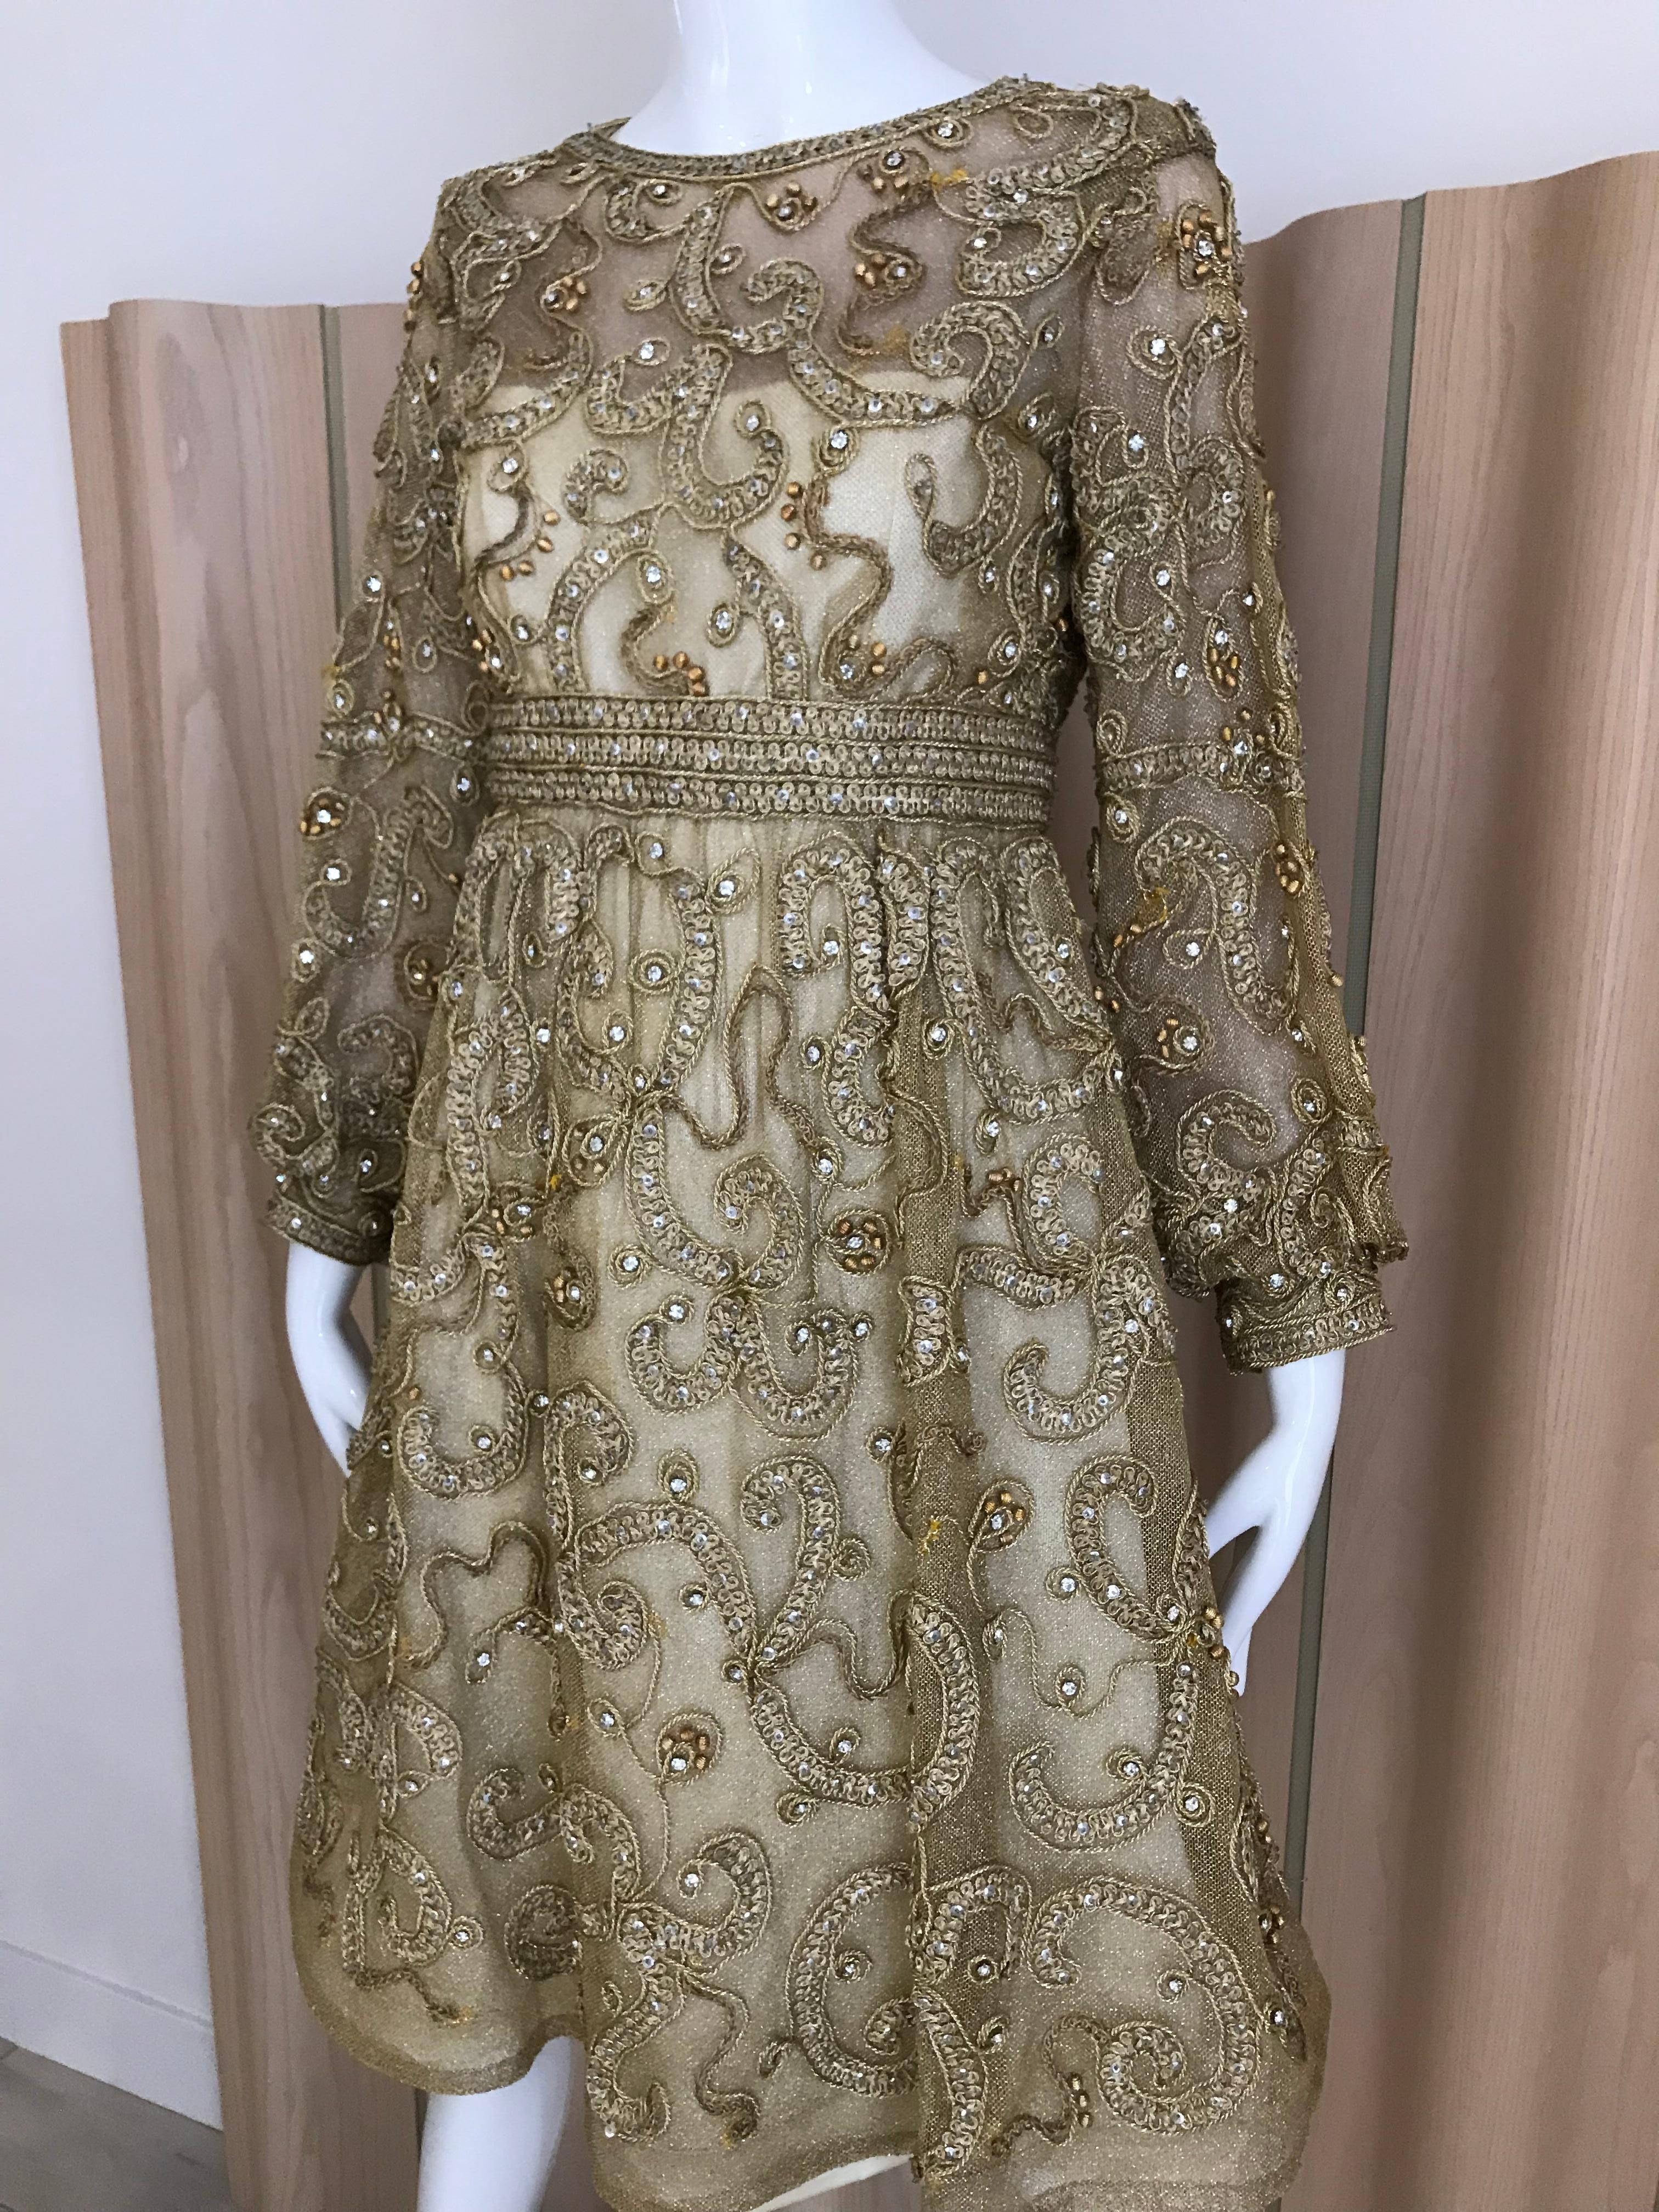 Vintage Malcolm Starr gold net overlay dress embellished with gold metallic braided ribbon and rhinestones. 
Dress has Scoop neck, fitted waist, poet sleeves with gathered cuff, sequins and rhinestones . Dress is lined, zipper up the back, covered